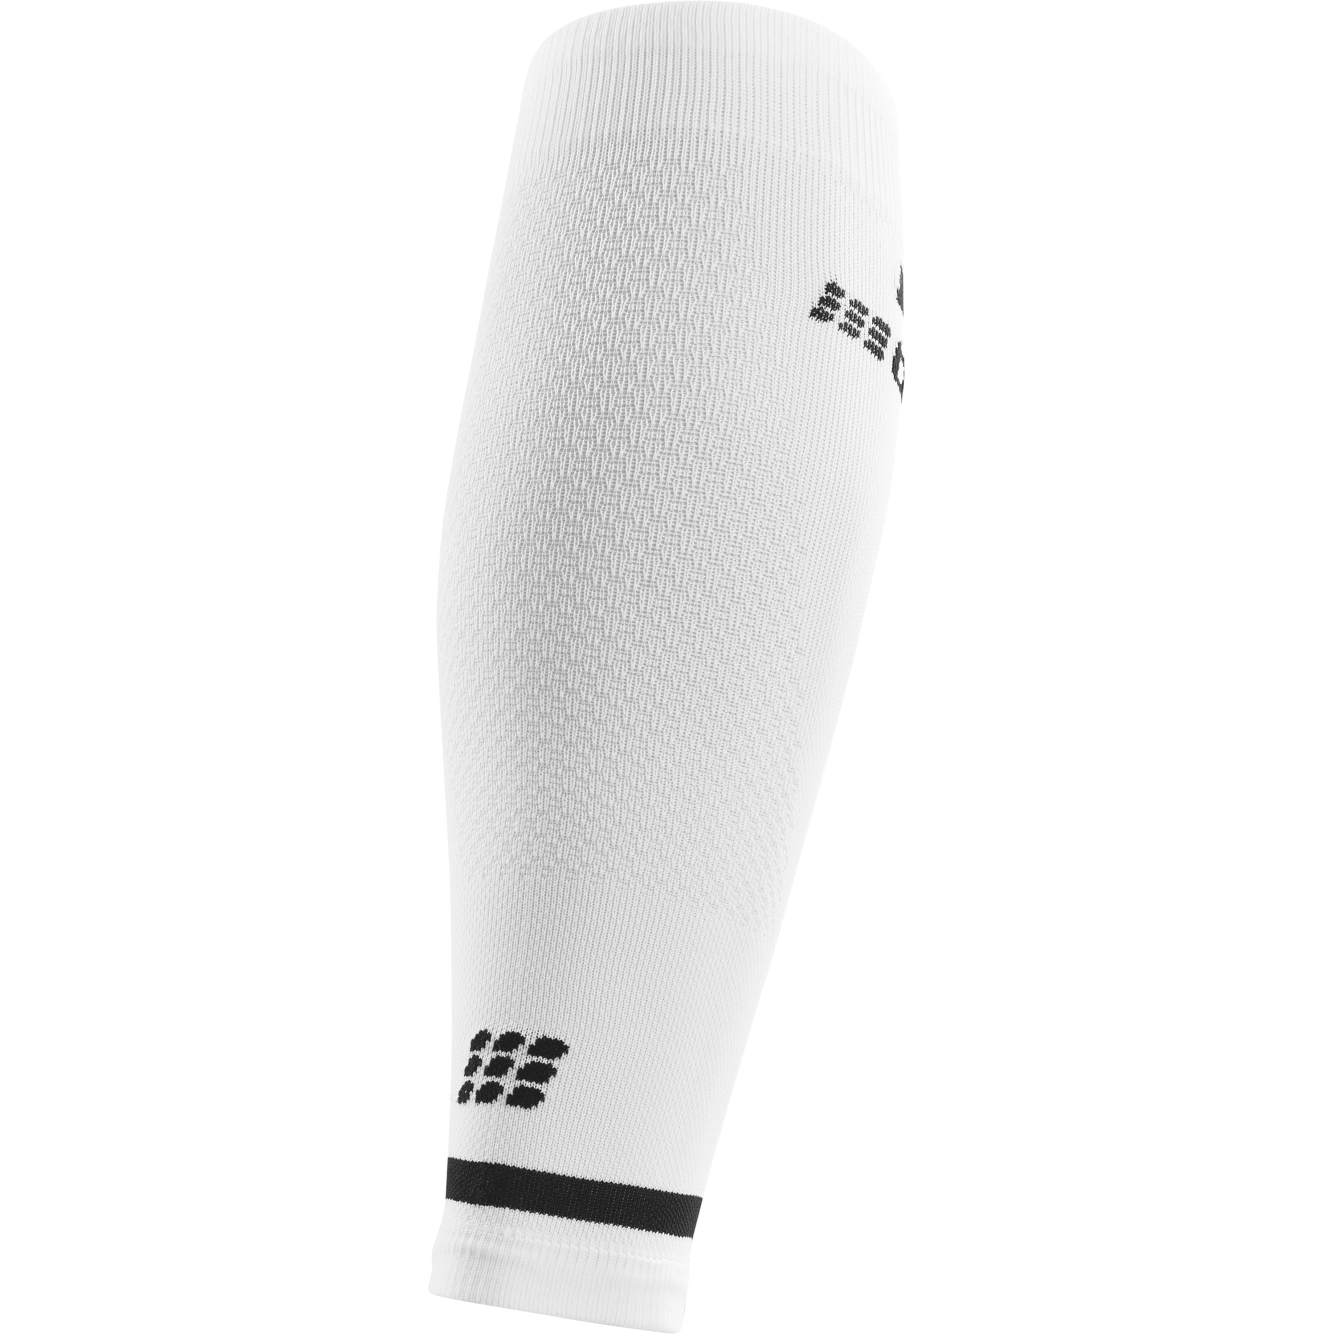 CEP Ultralight Compression Calf Sleeves Men